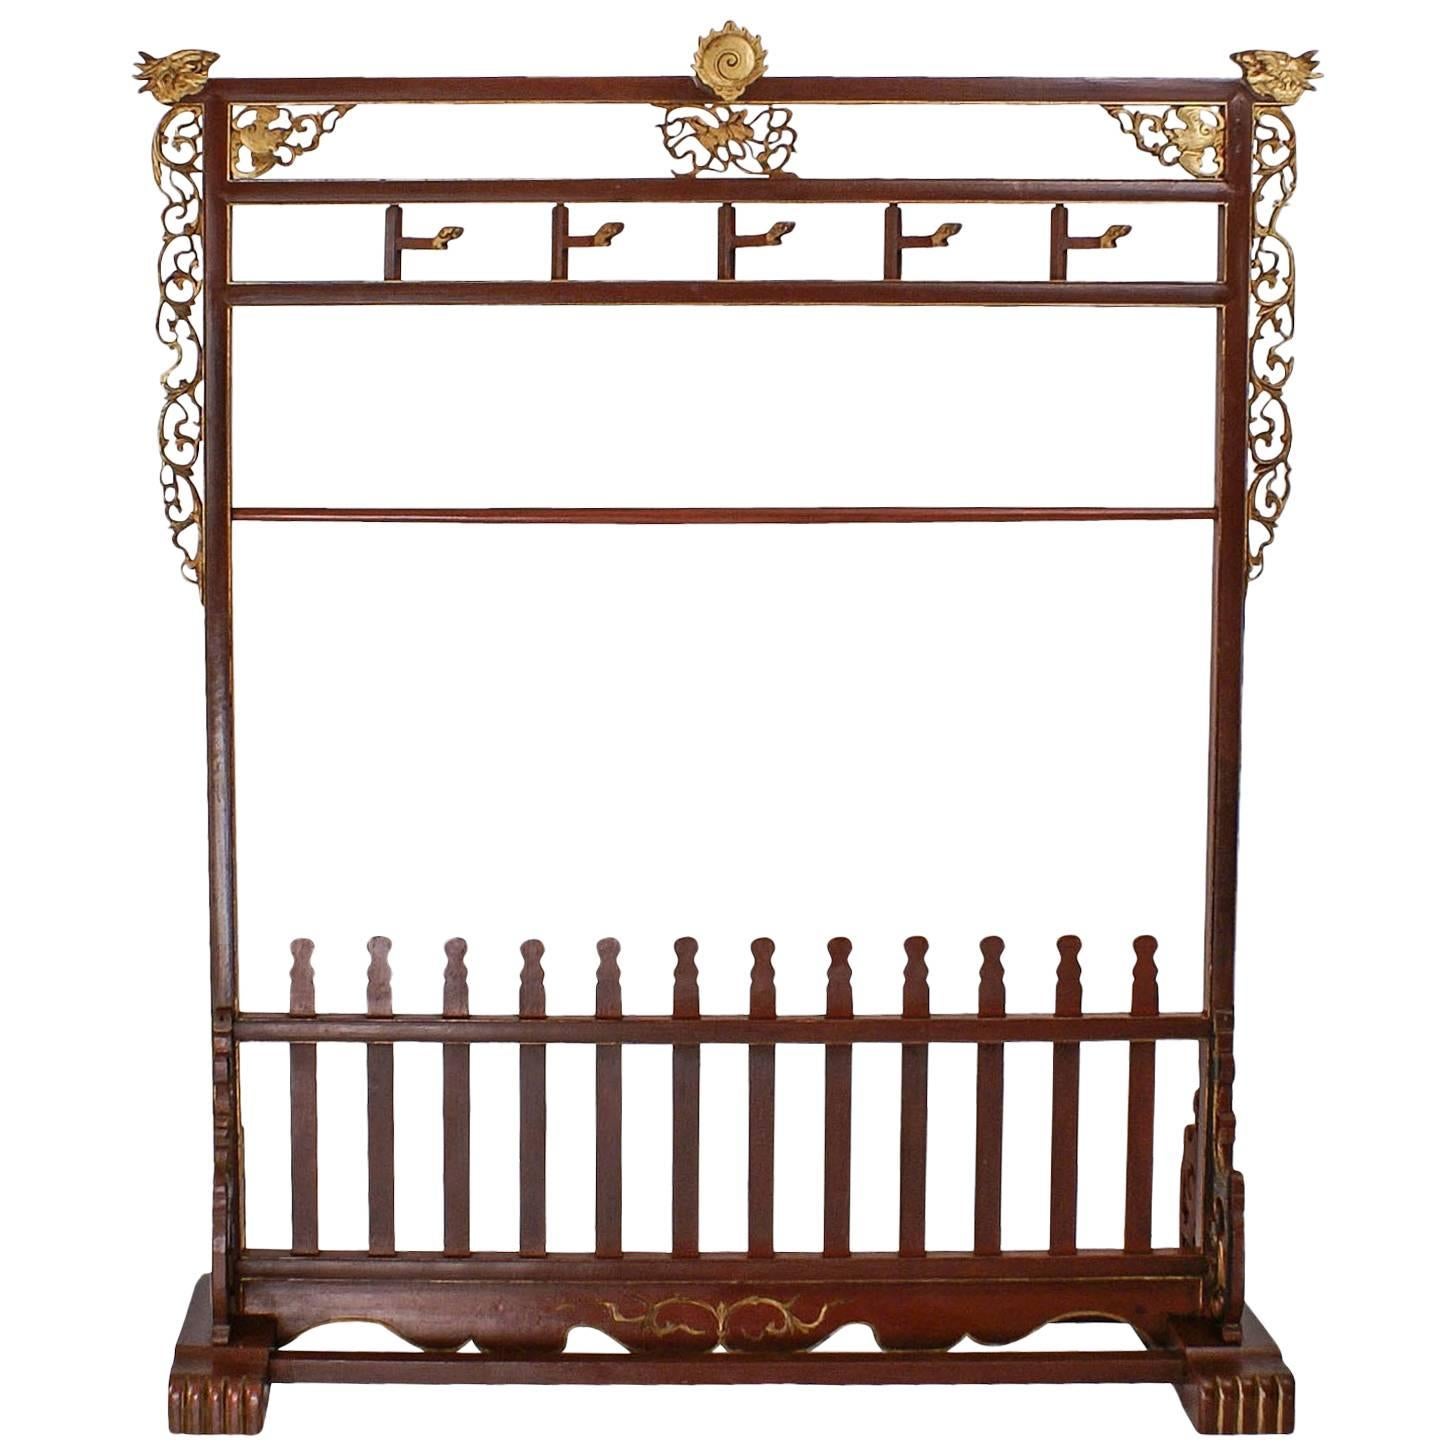 Late Ching Dynasty Coat and Shoe Rack, circa 1900